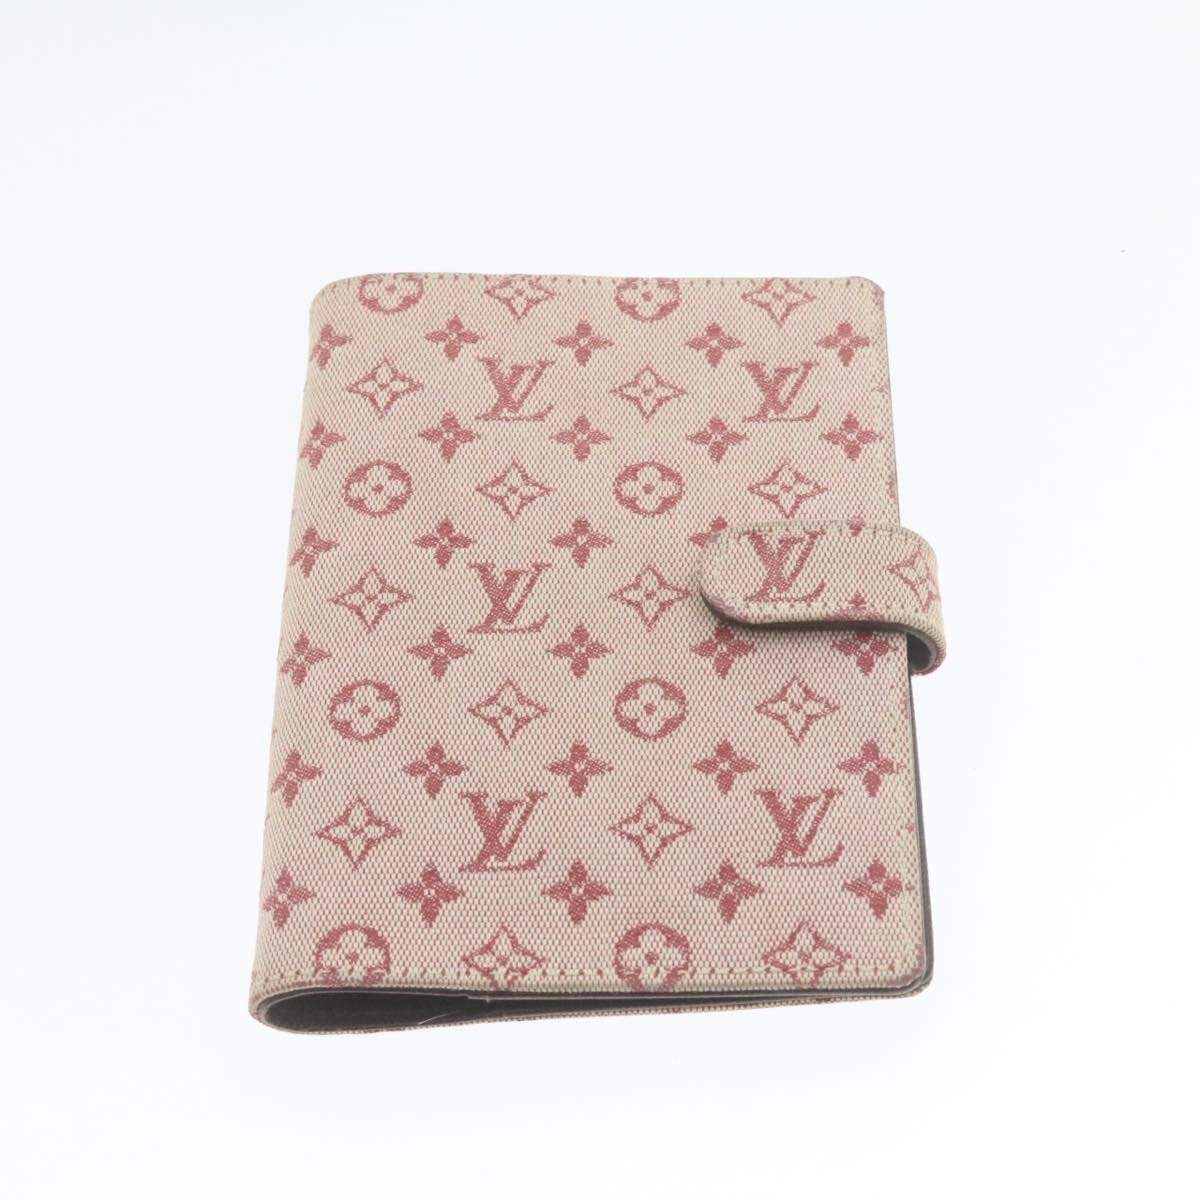 LOUIS VUITTON Monogram Ideal Agenda PM Day Planner Cover Red